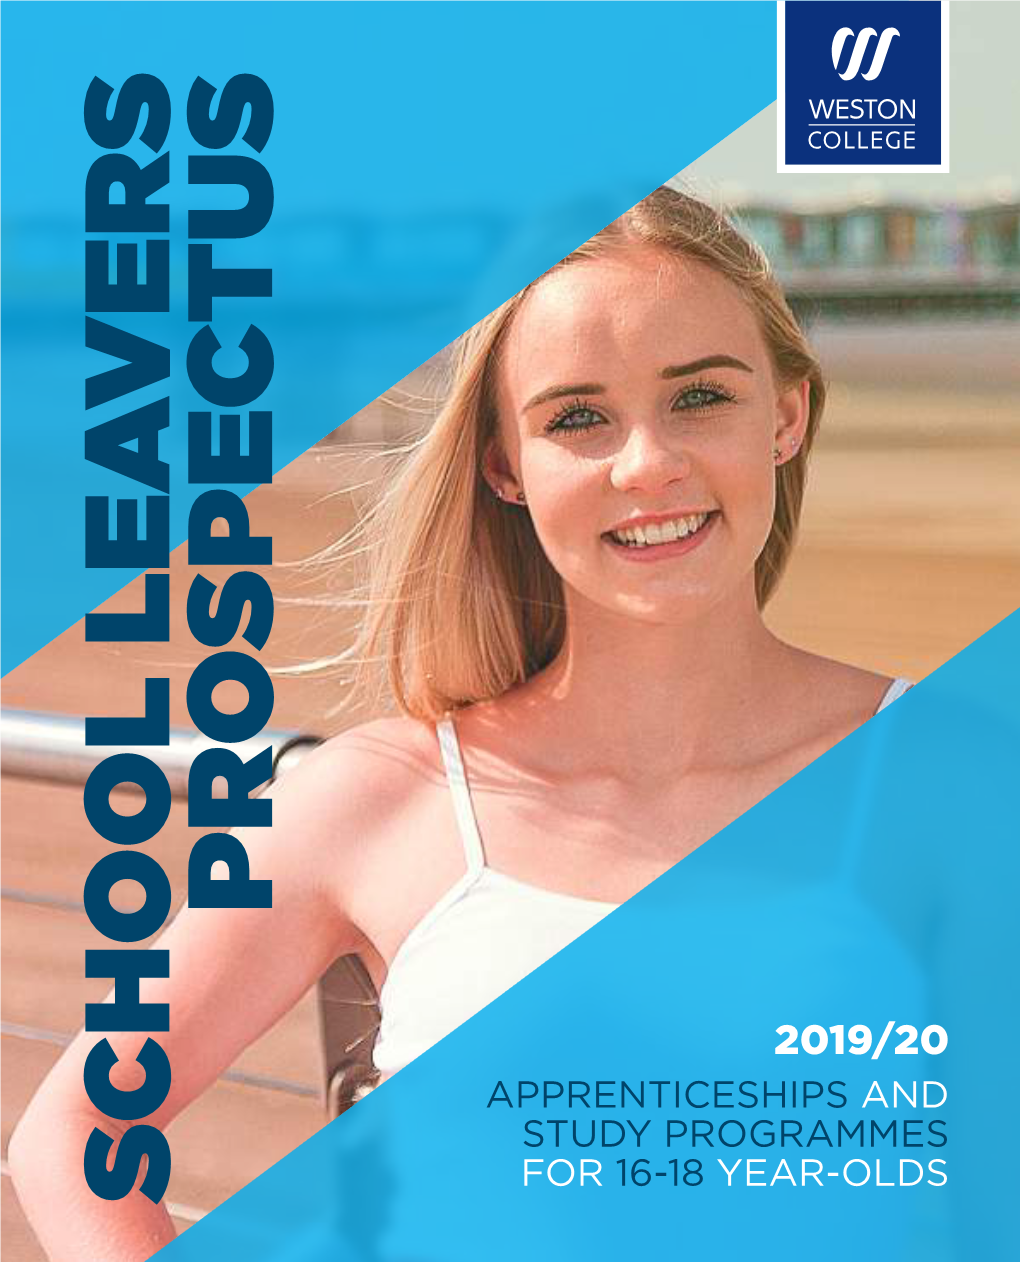 Apprenticeships and Study Programmes for 16-18 Year